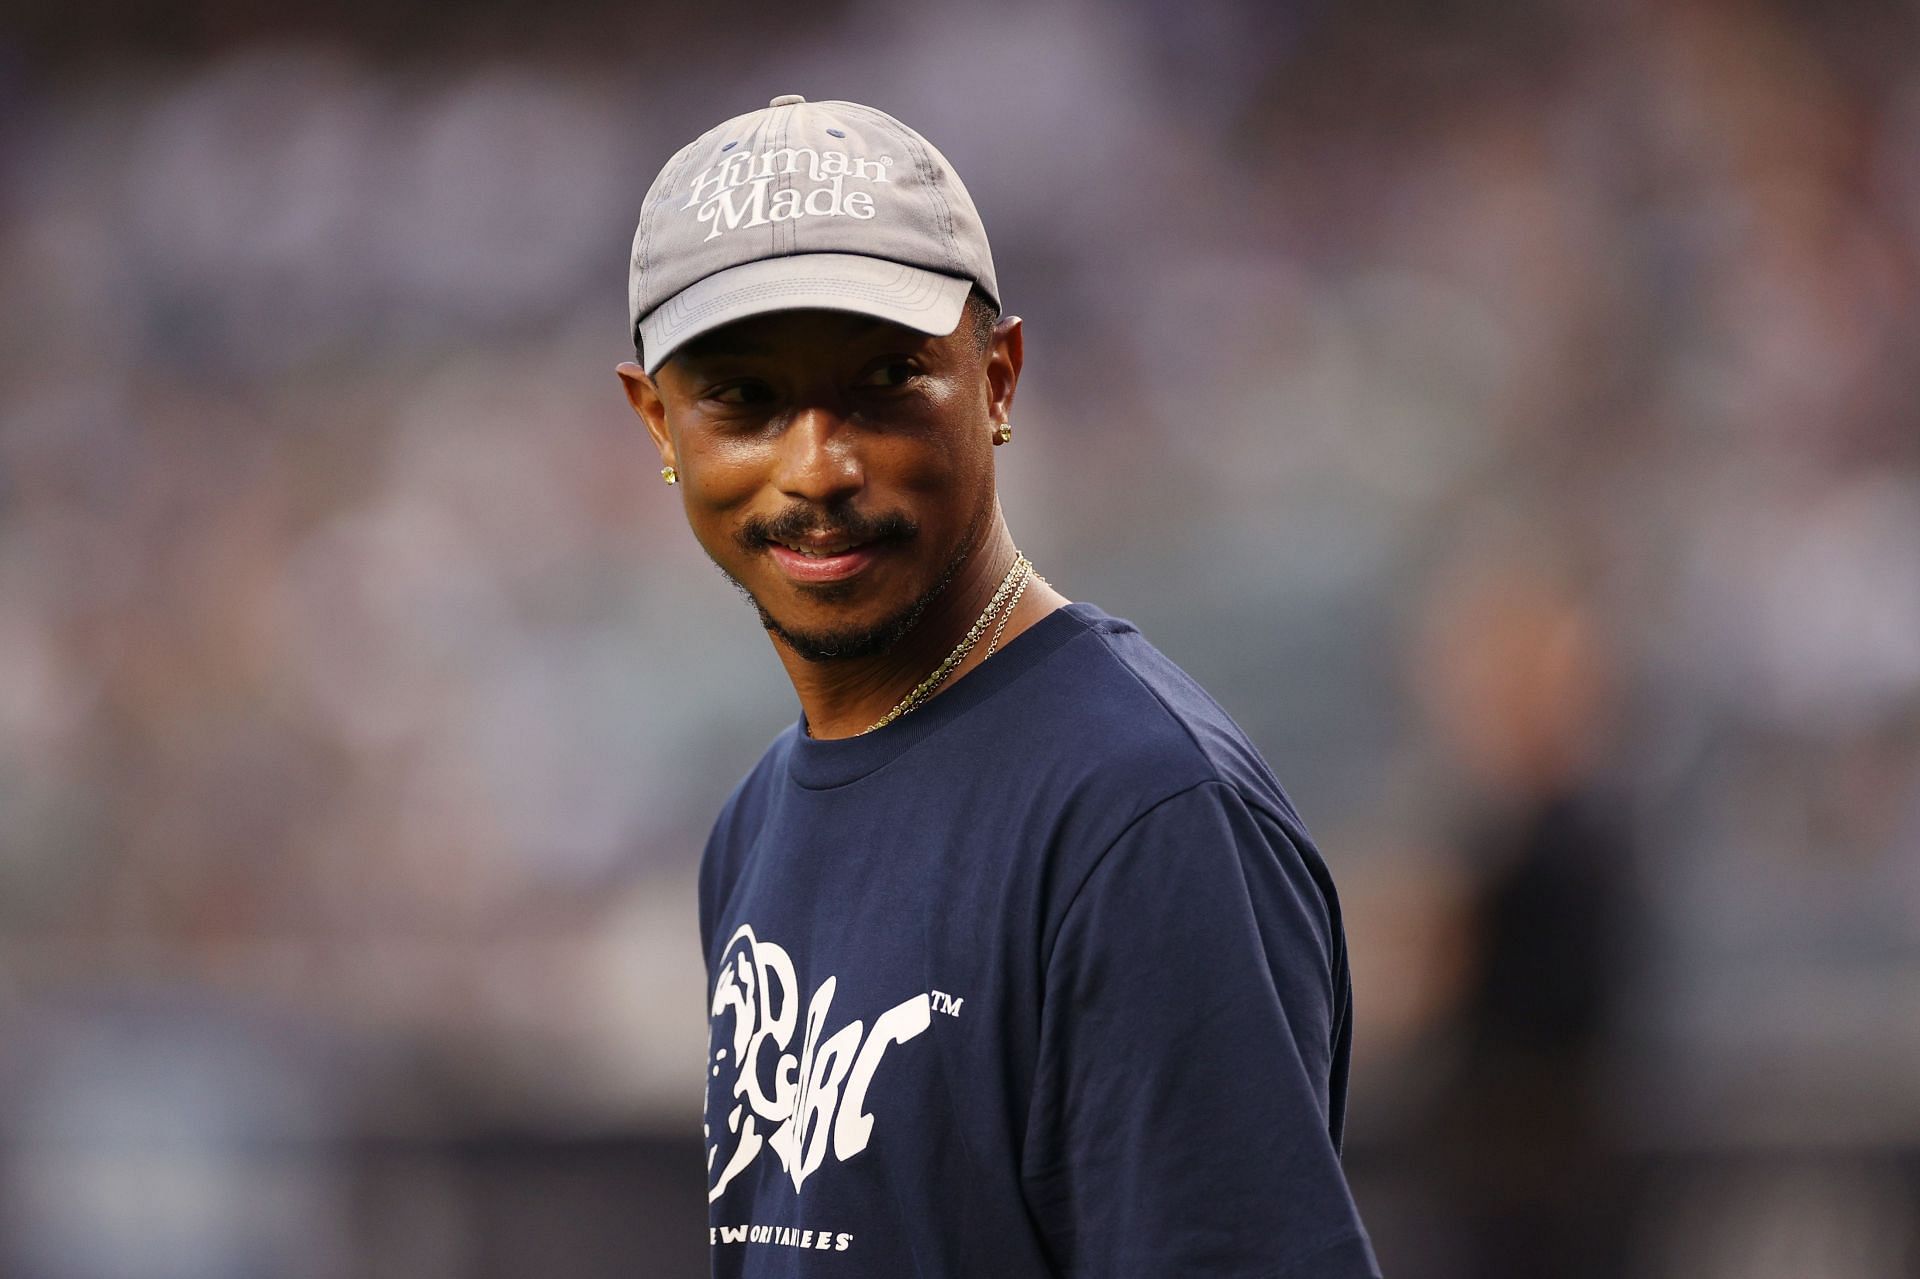 Pharrell Williams Throws First Pitch at Yankees vs. Mets Game – WWD